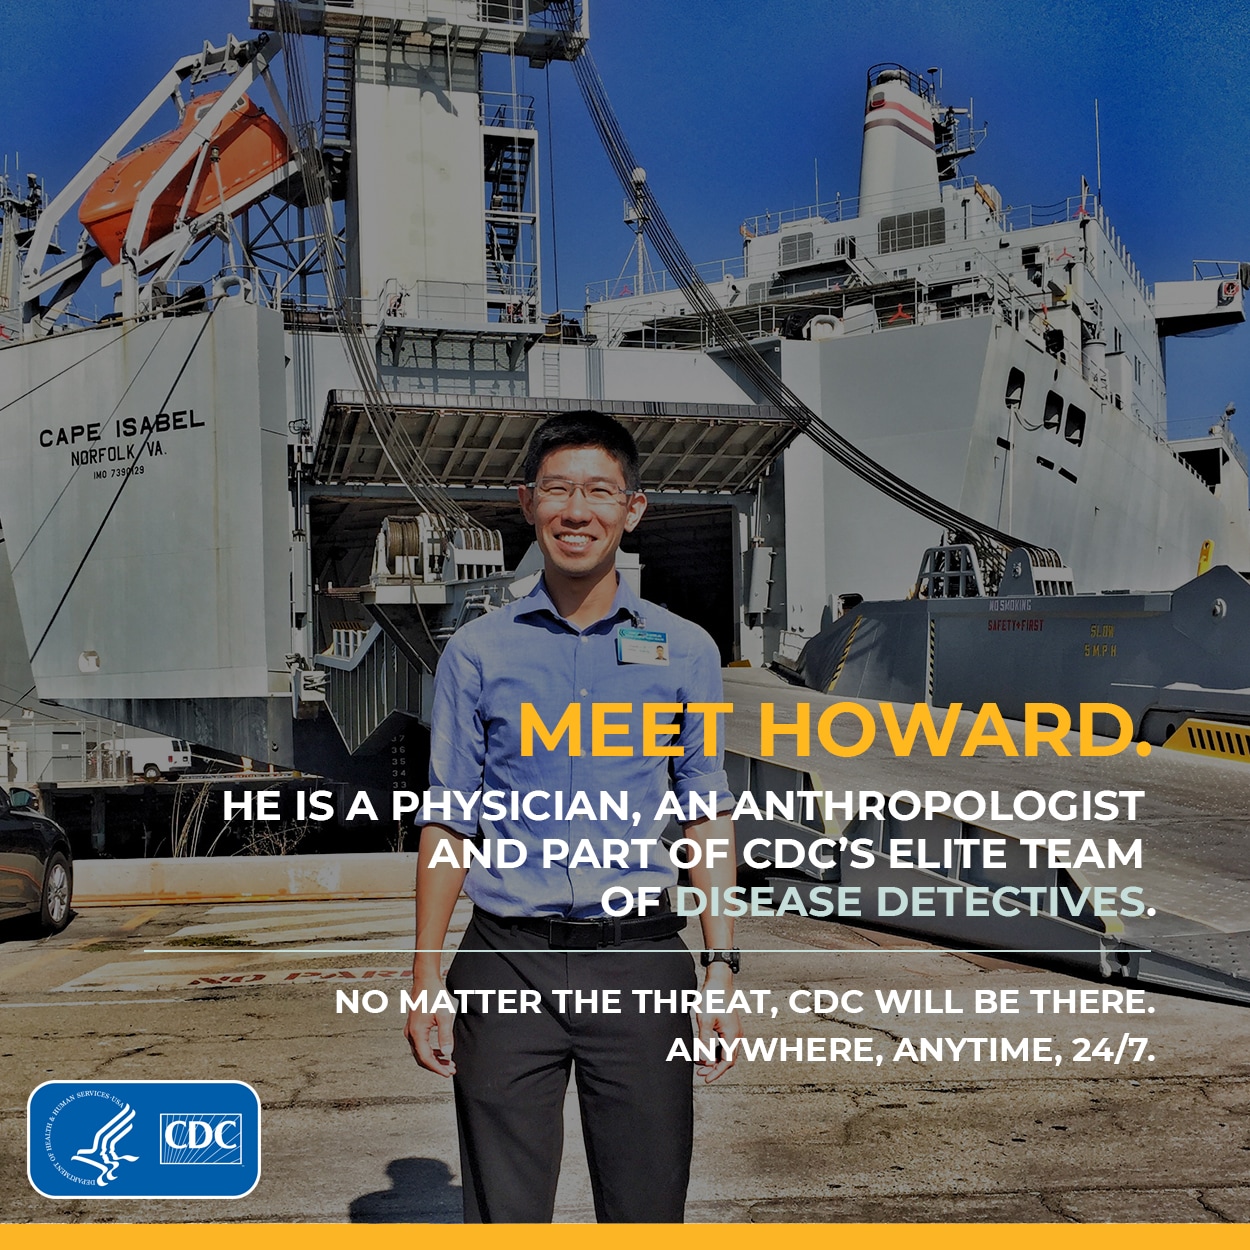 Meet Howard.  He's a physician, an anthropologist and part of CDC's elite team of Disease Detectives.